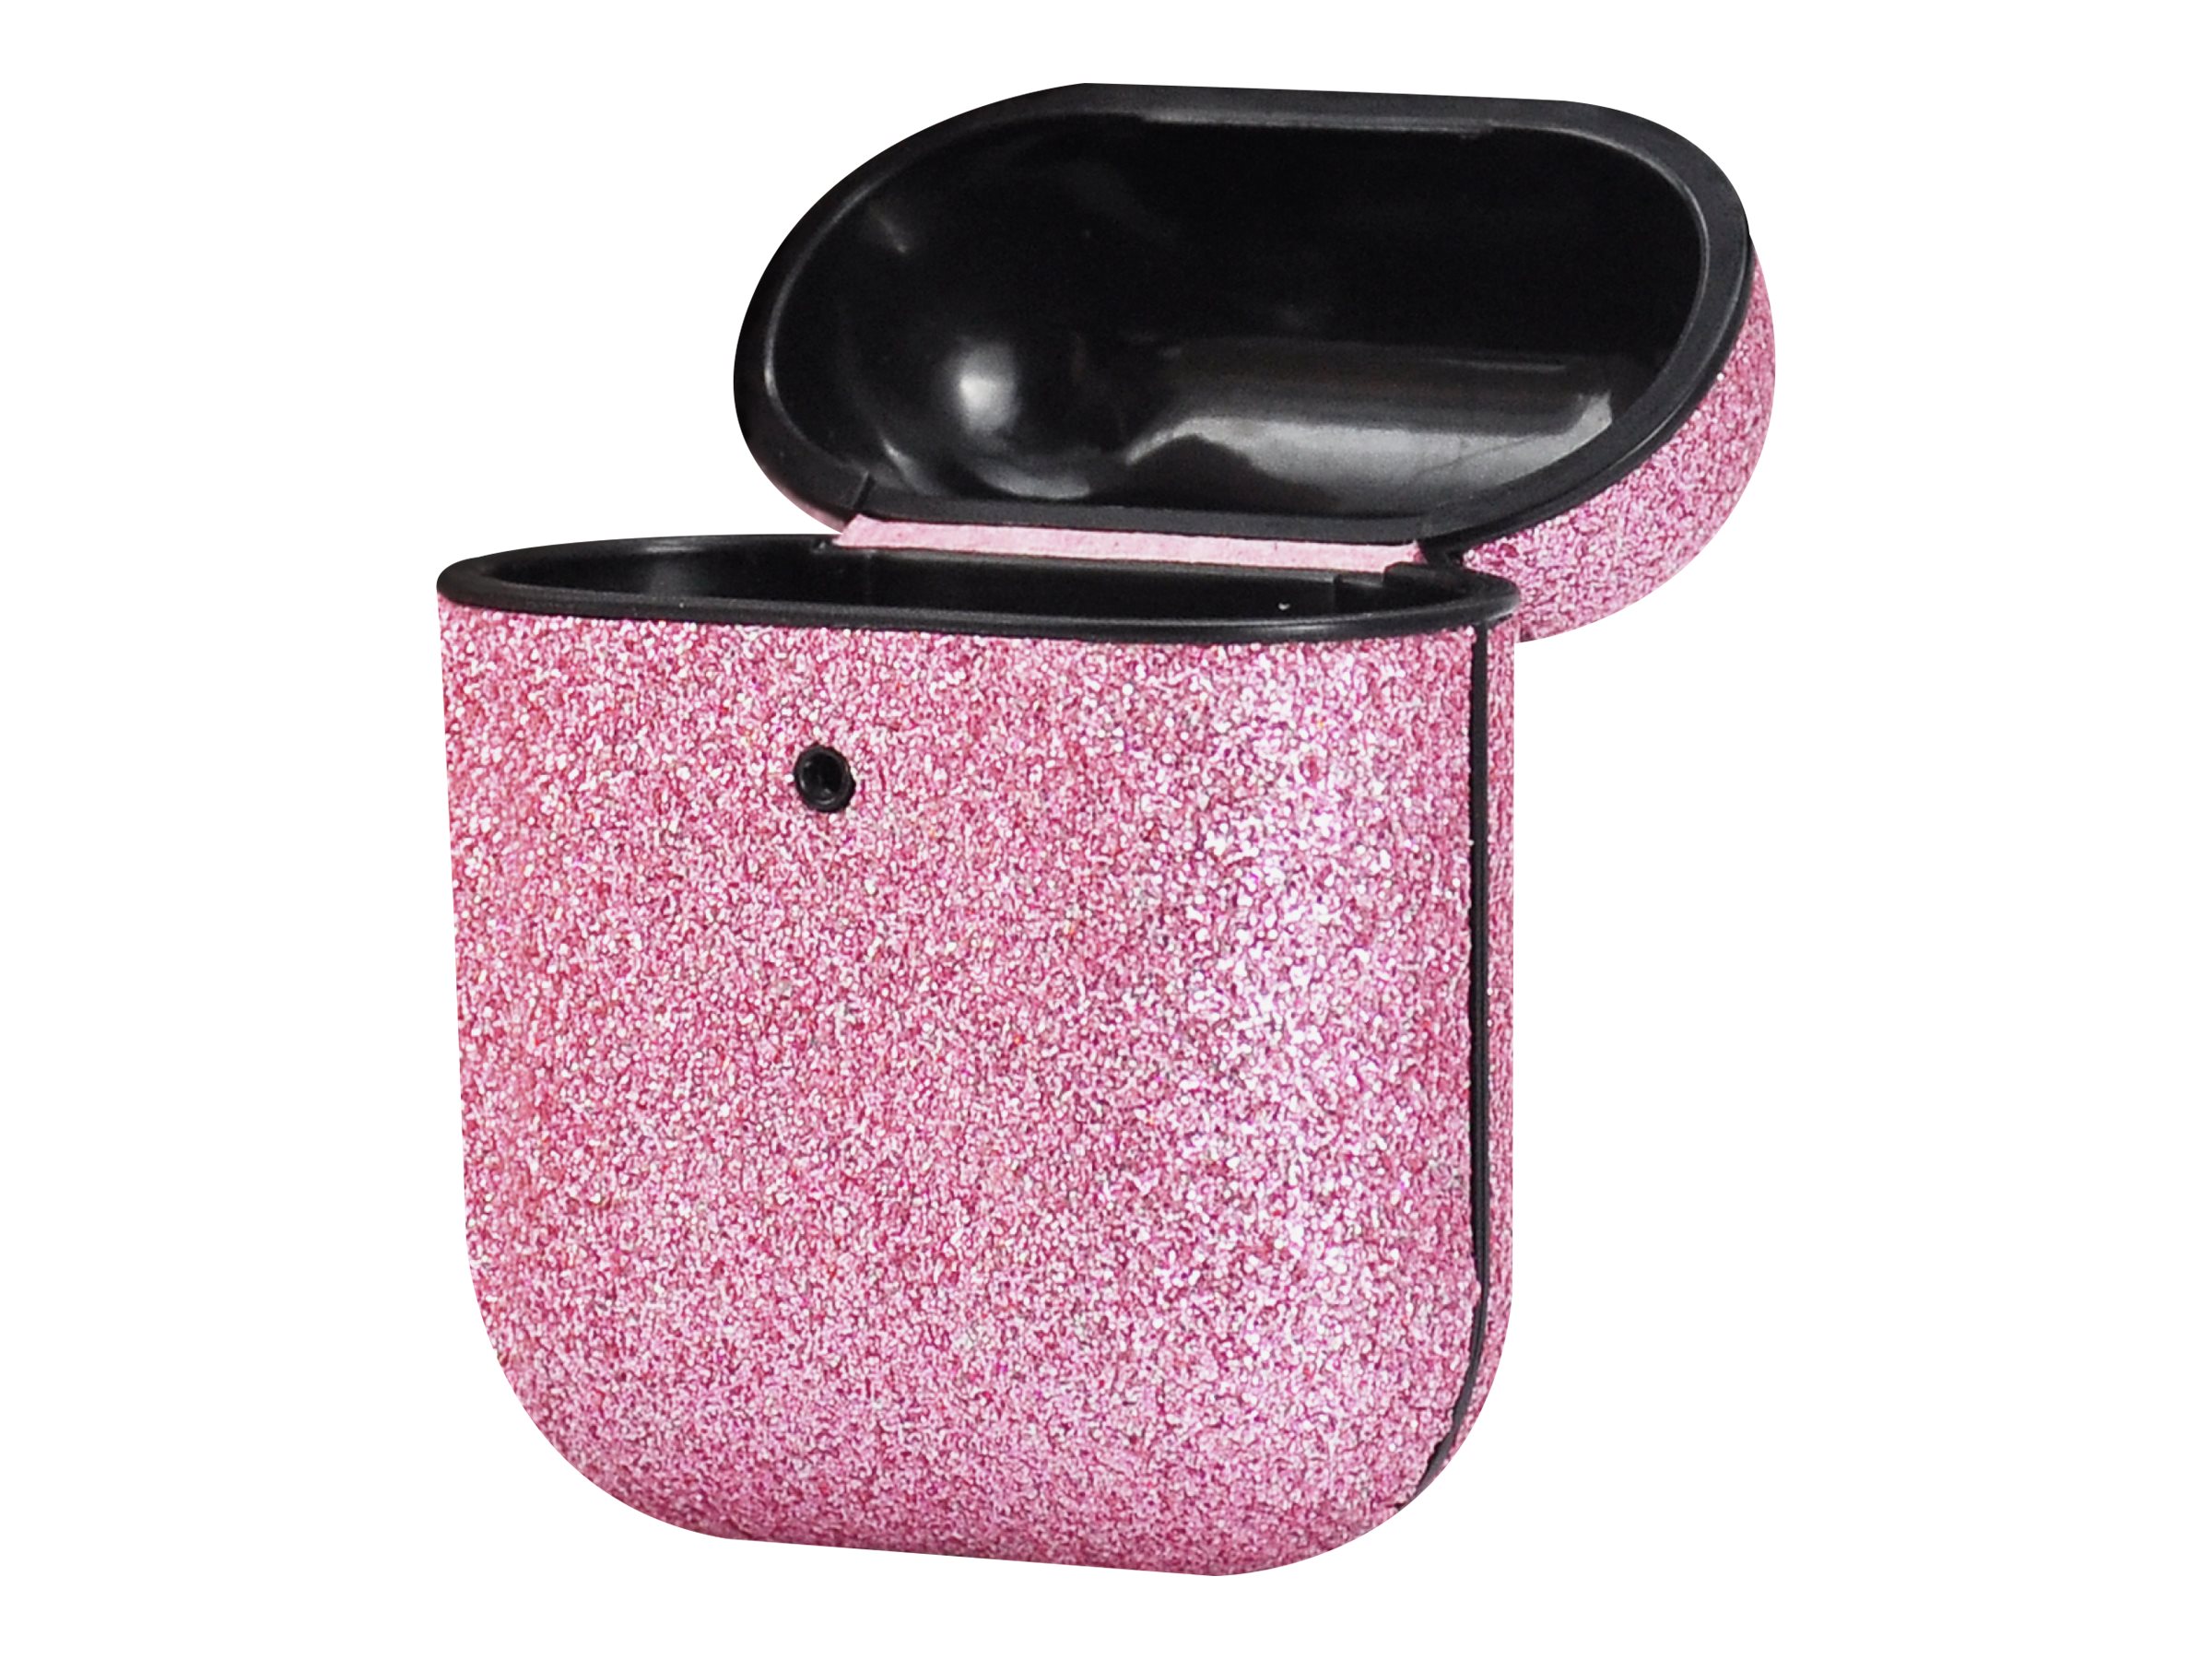 TerraTec AirBox Shining Pink